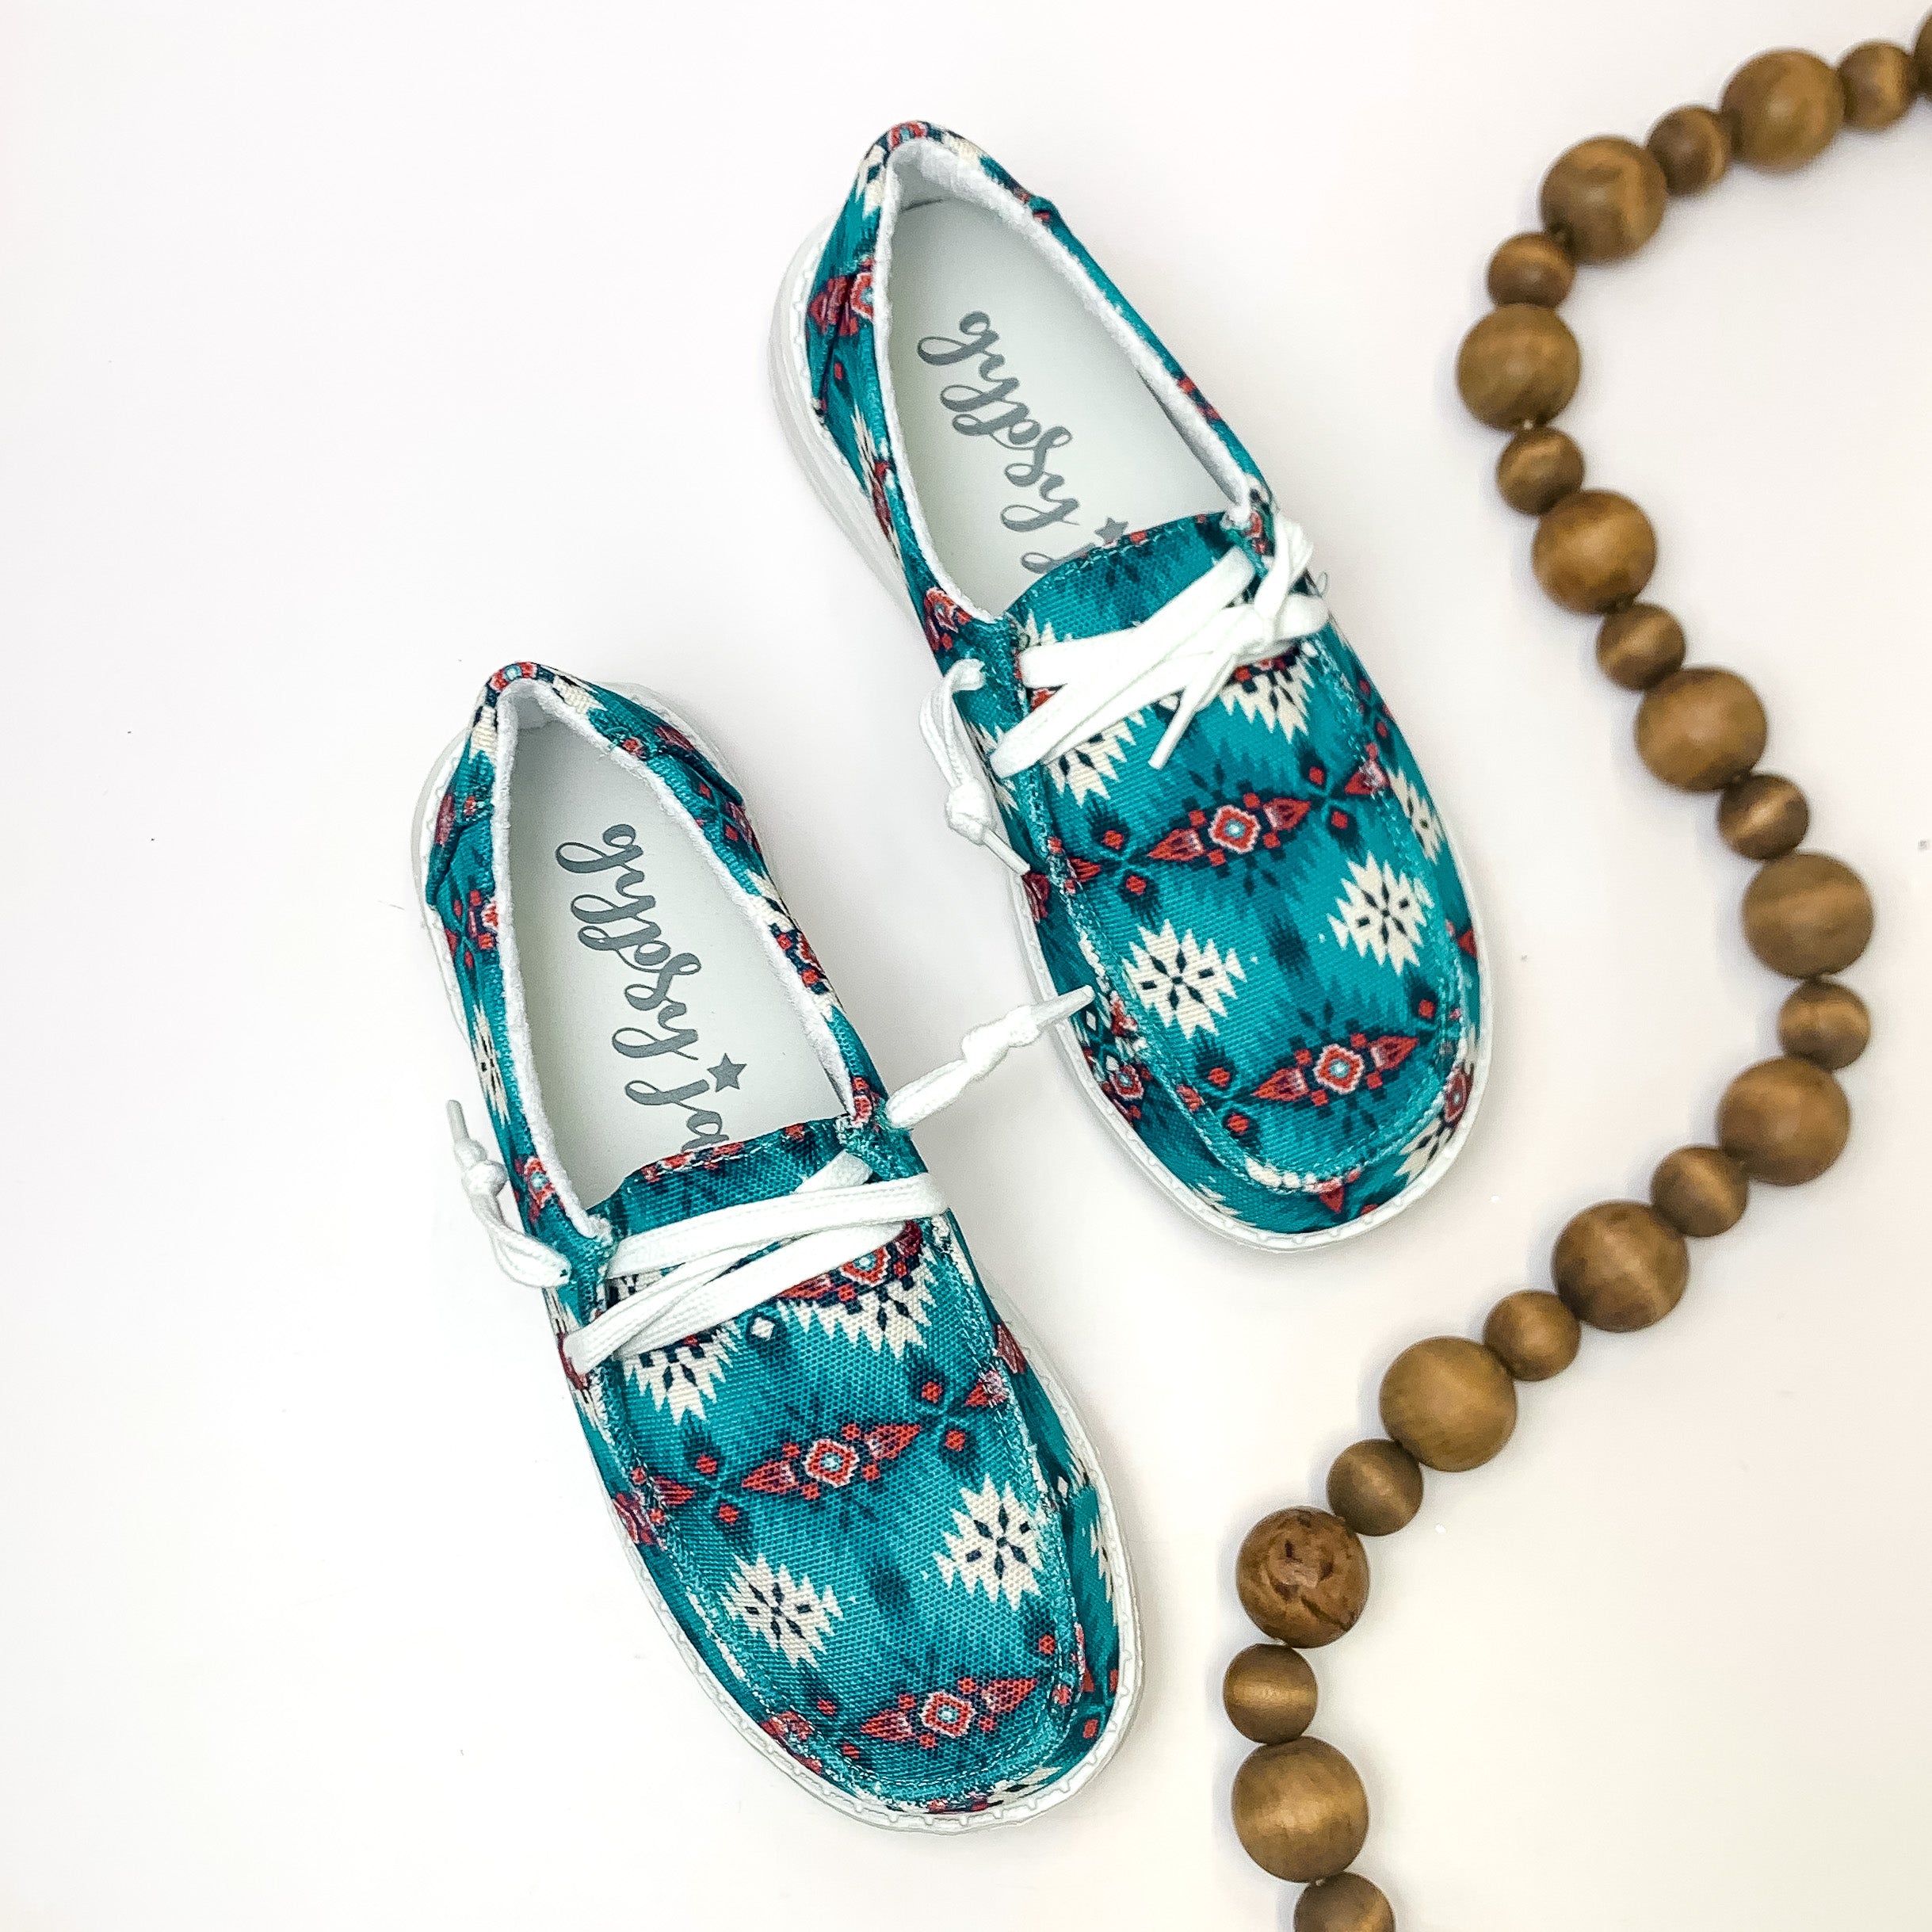 Very G | Have To Run Slip On Loafer with Laces in Turquoise Blue Aztec Print - Giddy Up Glamour Boutique